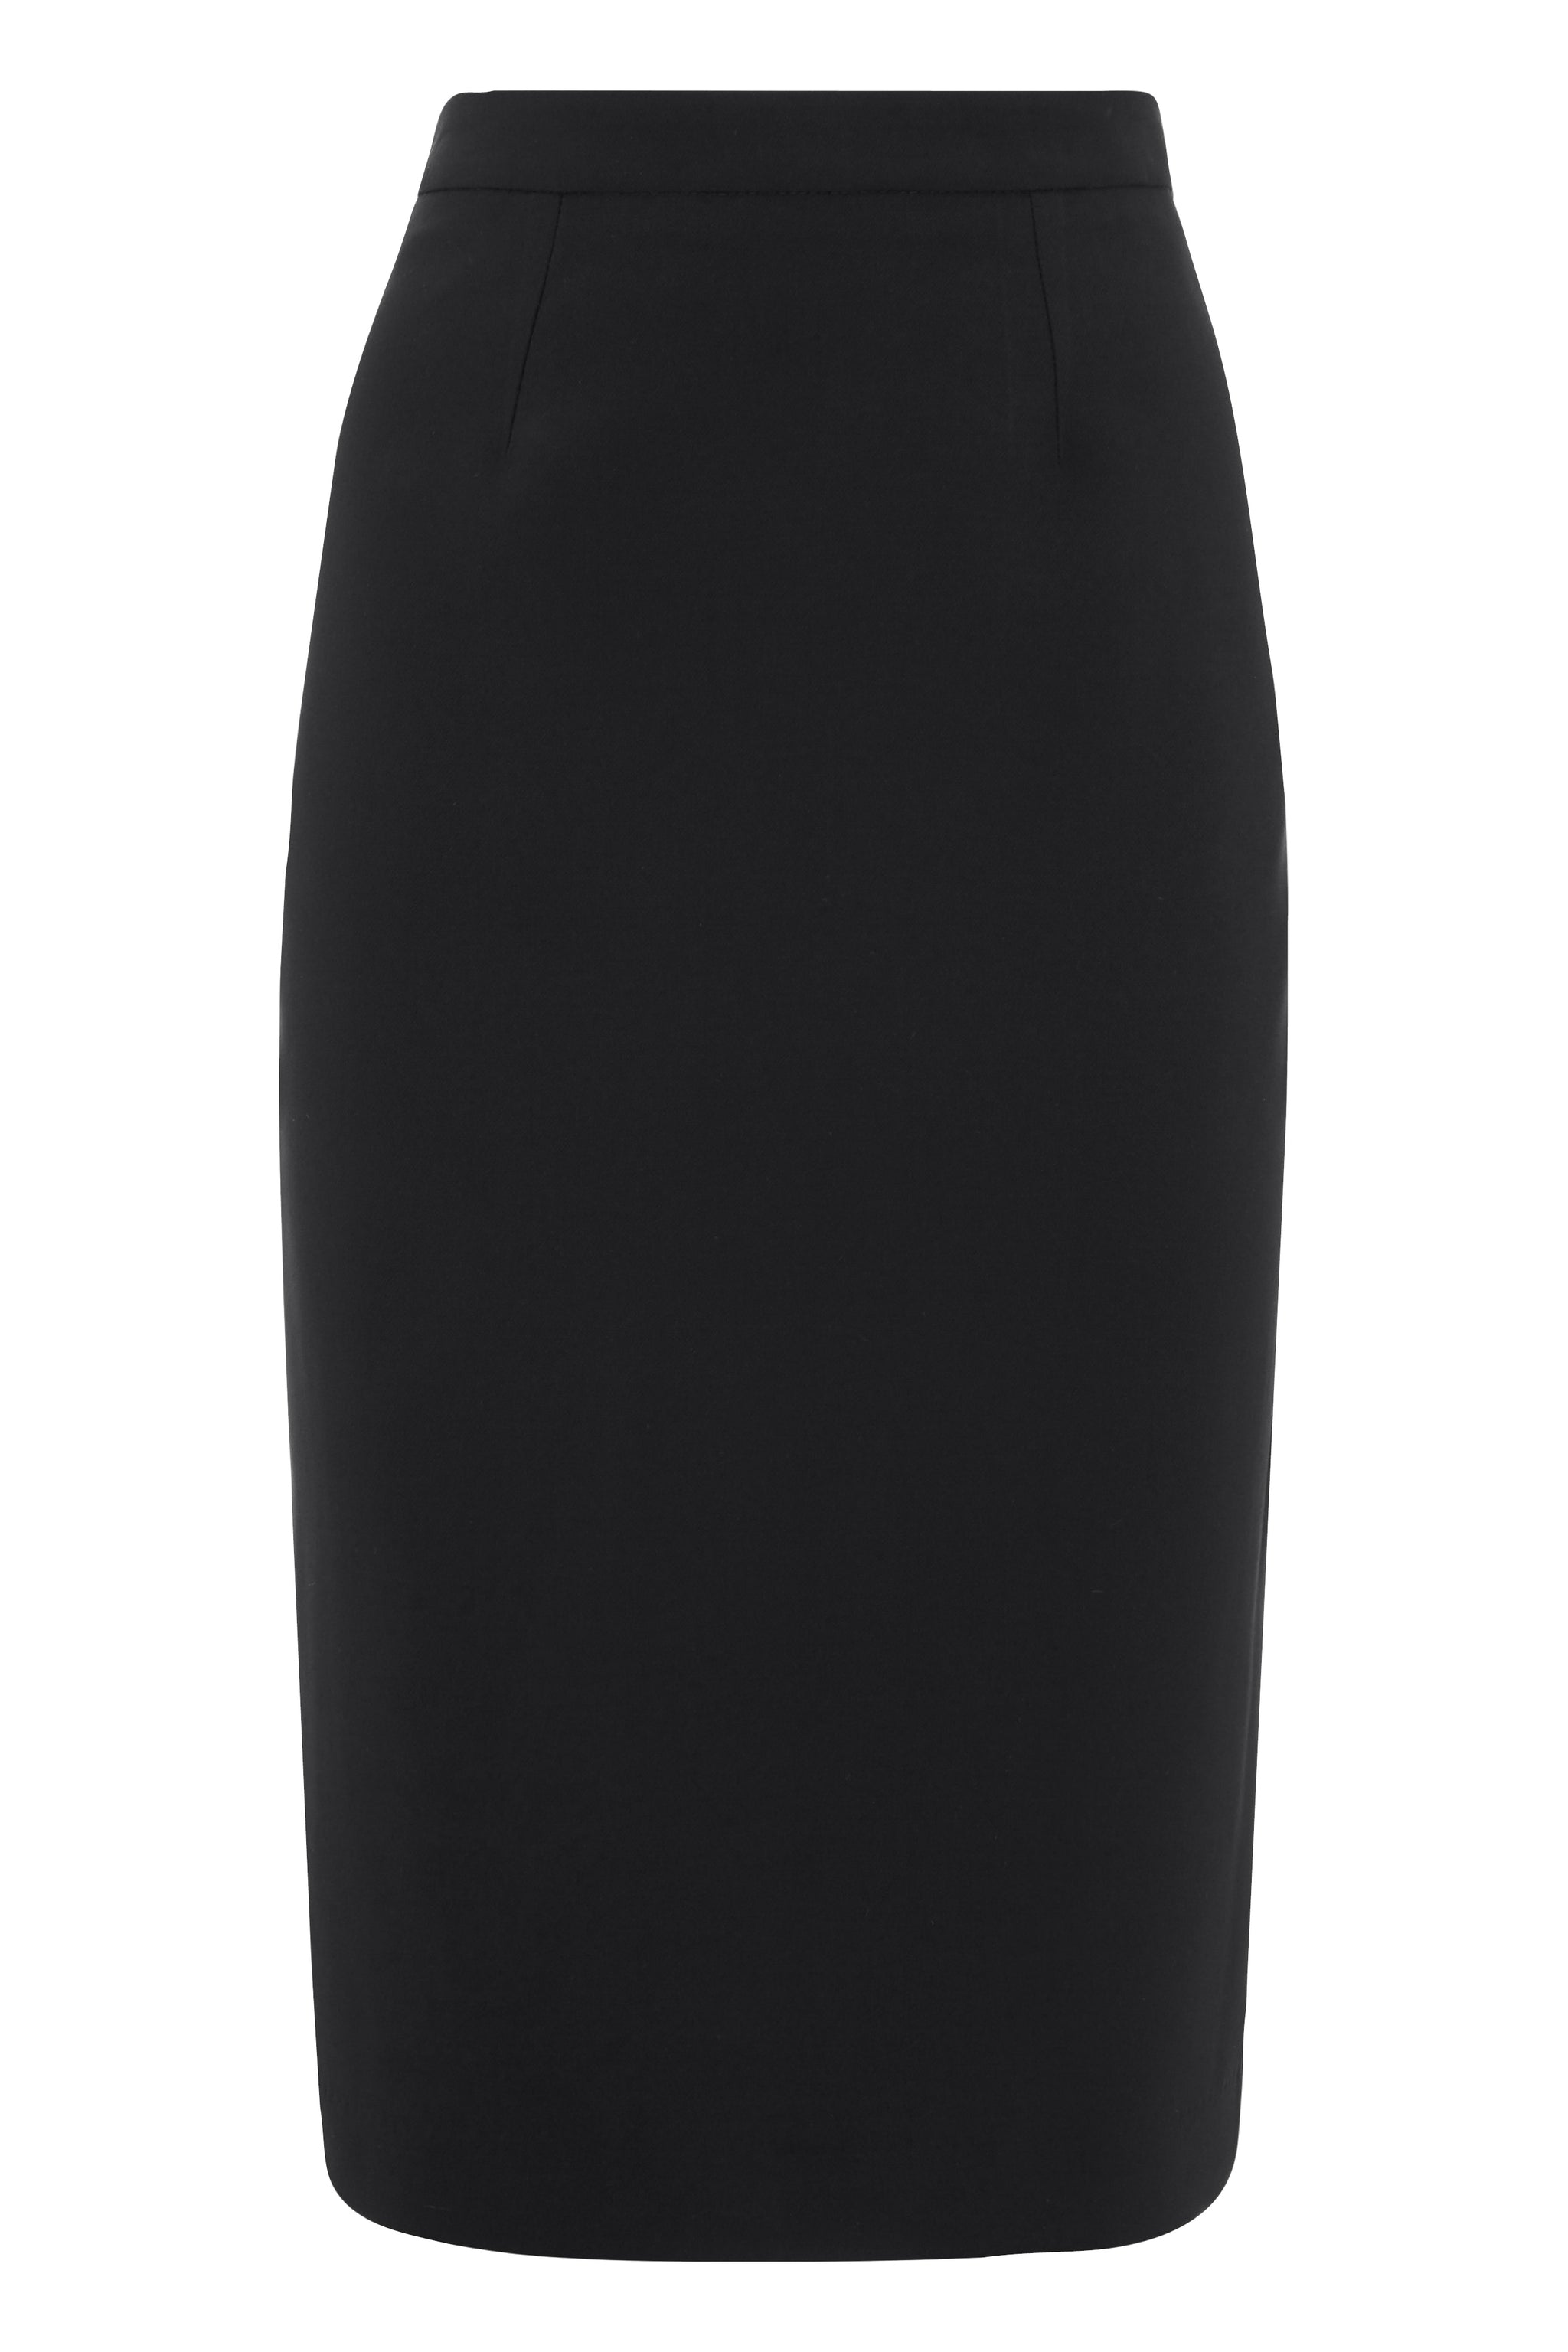 Suzy Black Suiting Skirt